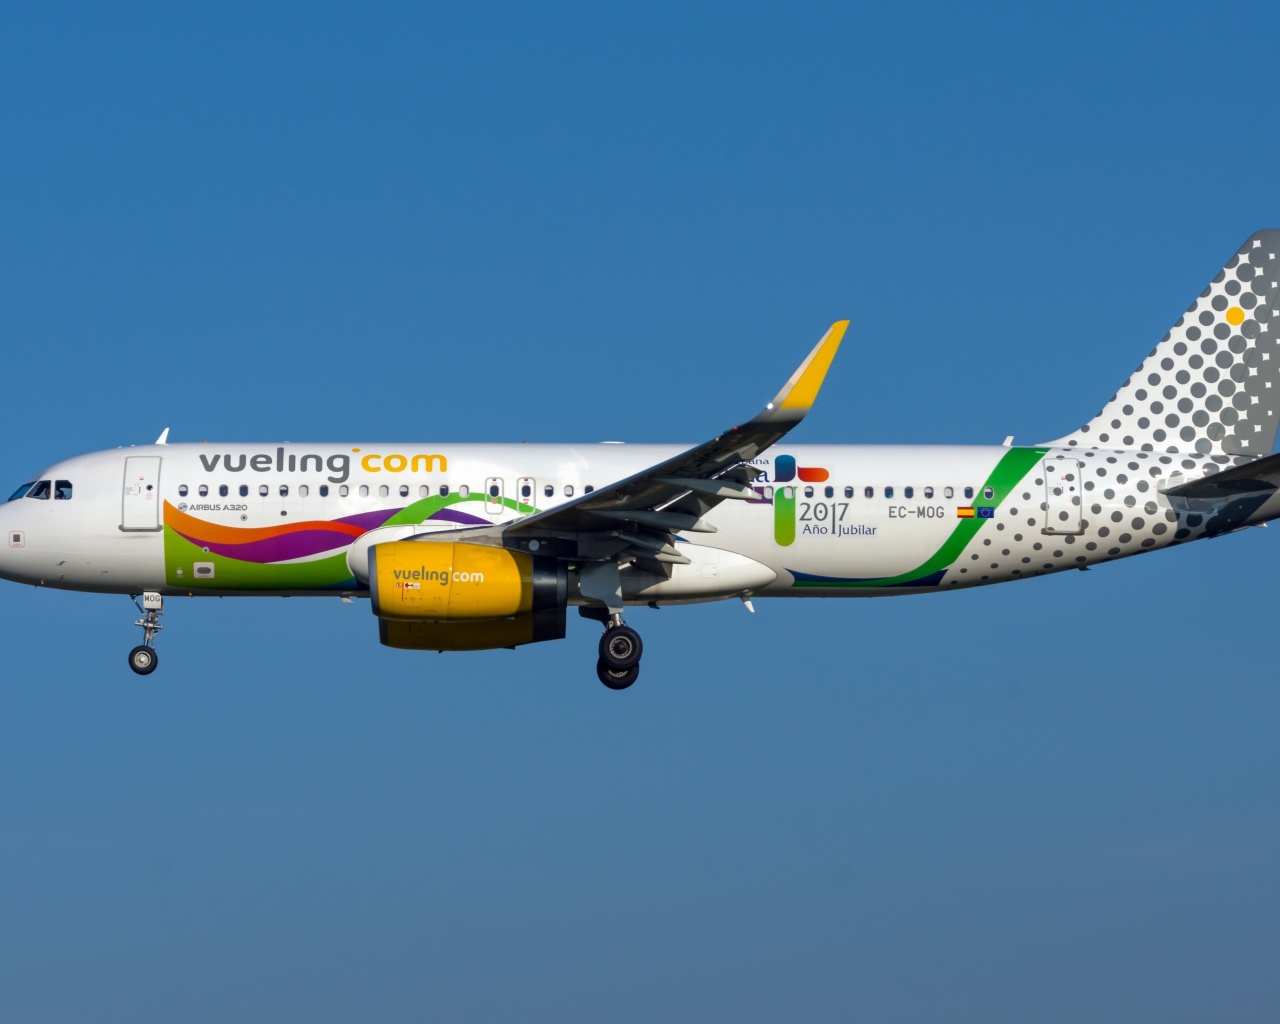 Airbus A320 Vueling Airlines wallpaper 1280x1024